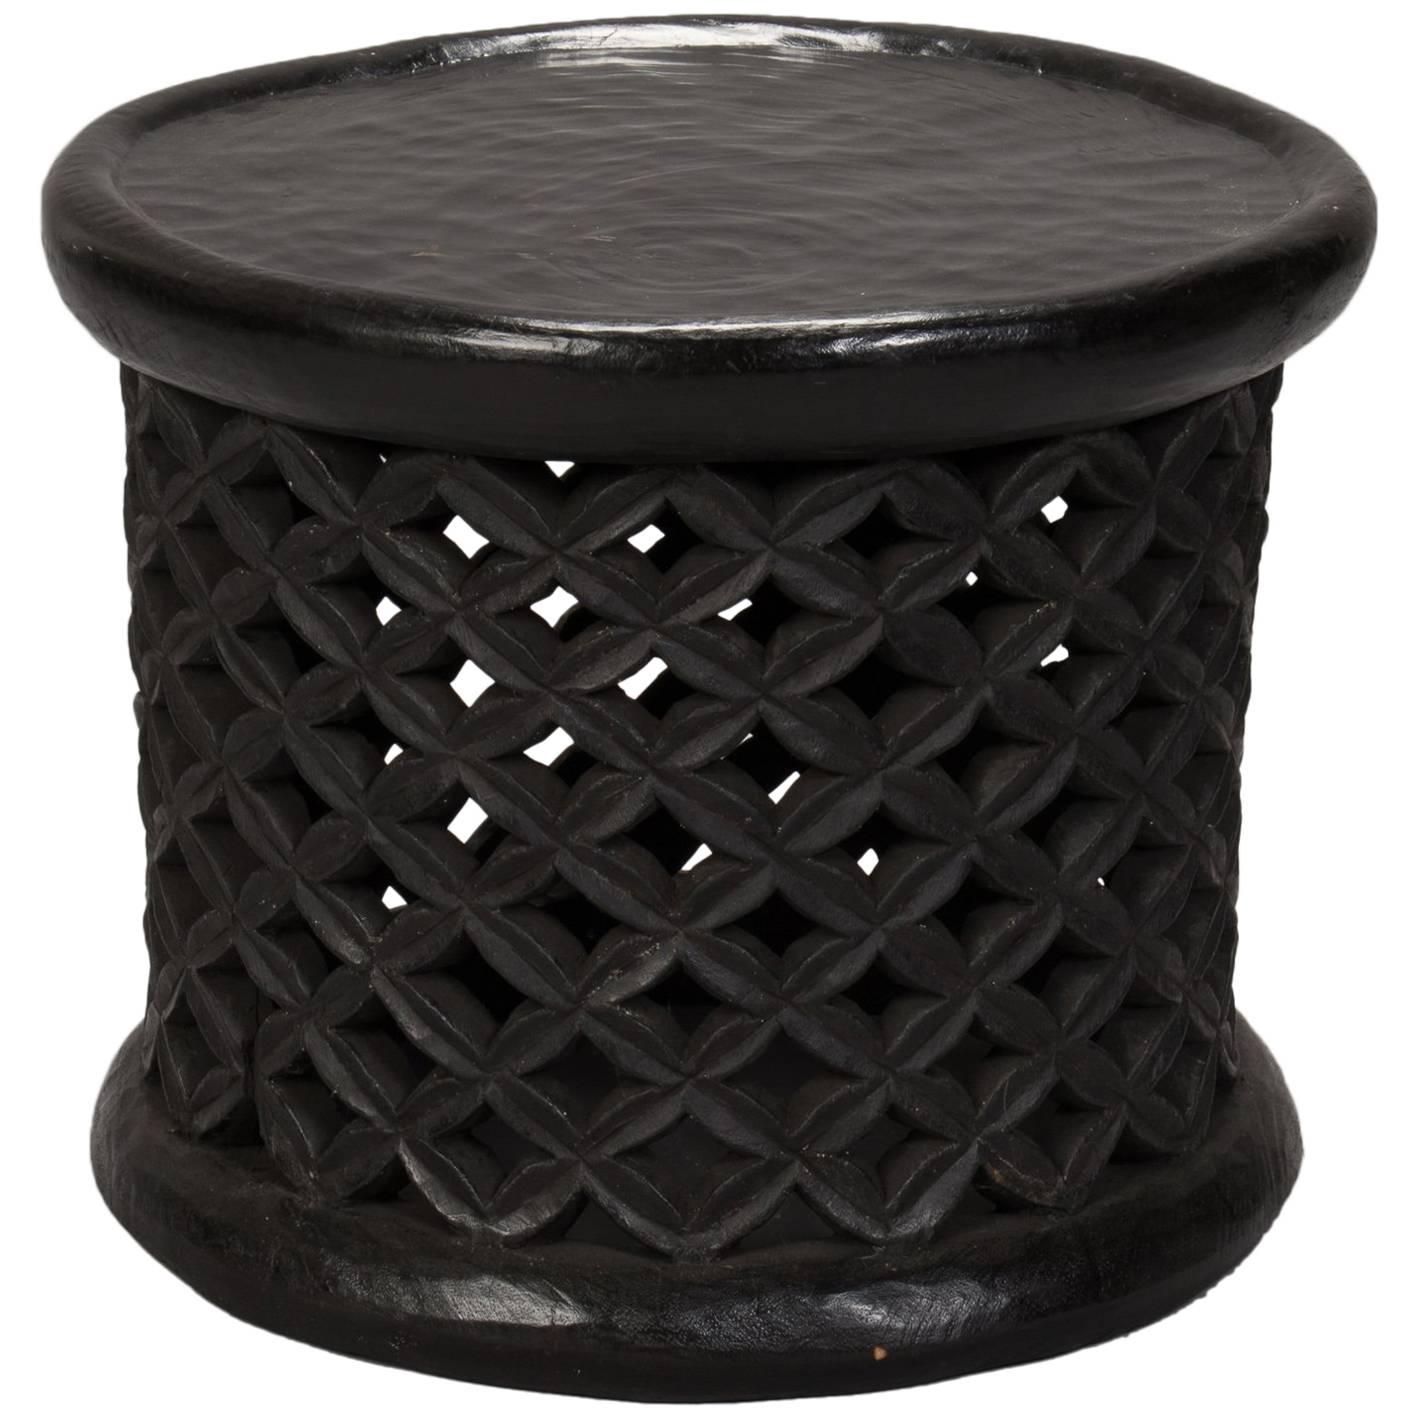 Bameleke Grid Pattern Carved Table or Stool from Cameroon